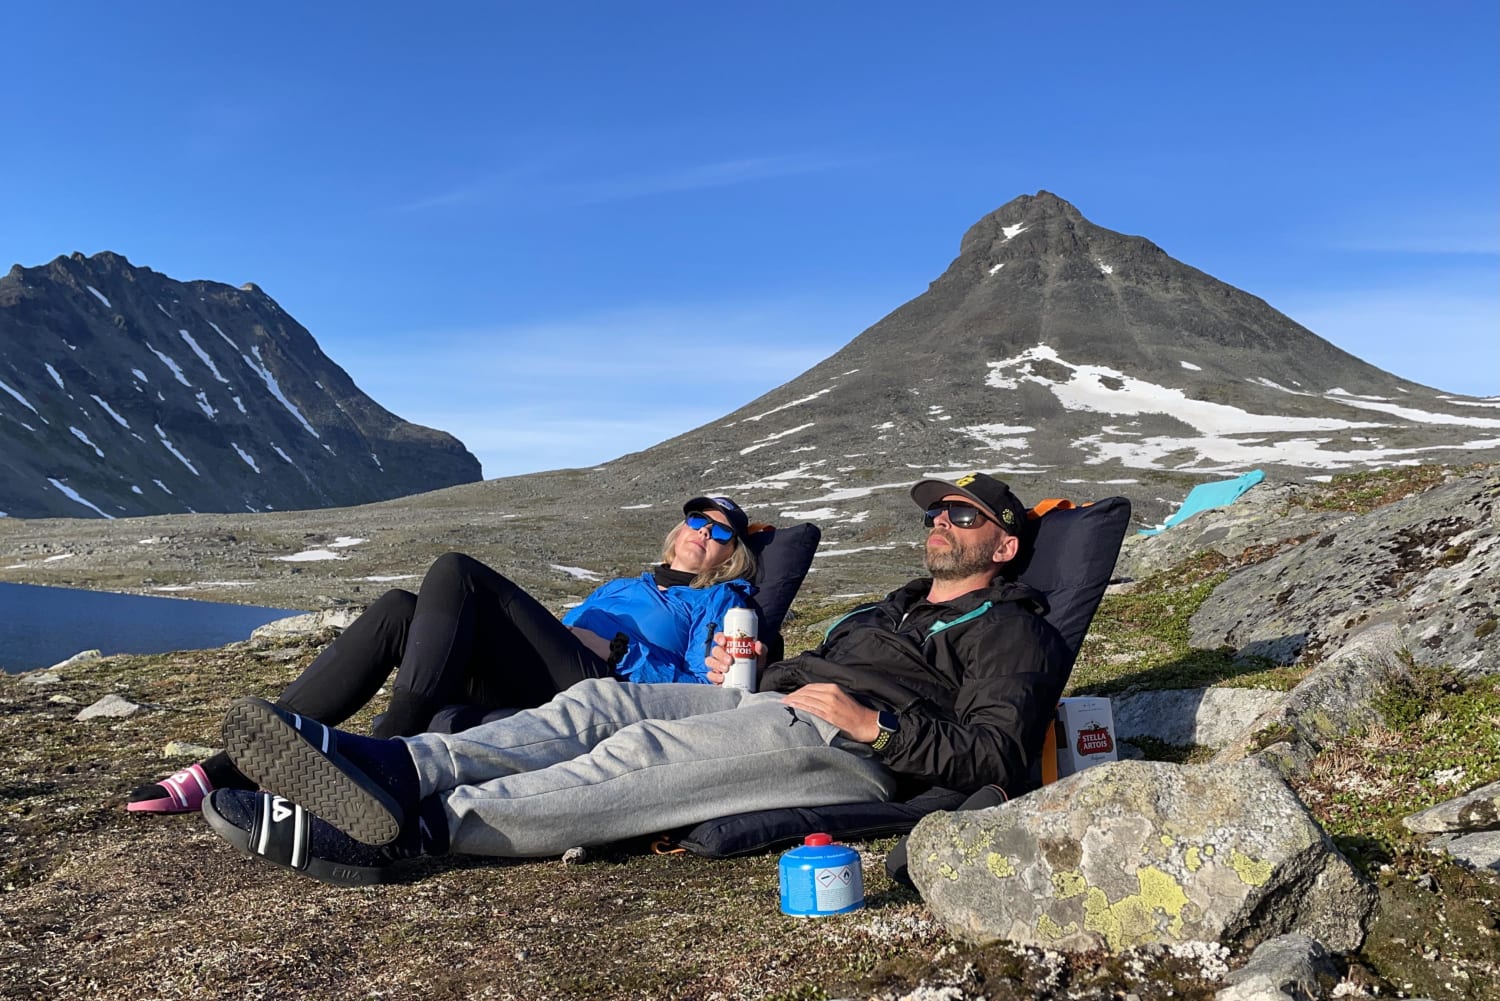 Camped at the bottom of Kyrkja in Jotunheimen (Norway) this weekend. Hiked up Kyrkja (in the backround) the next day.